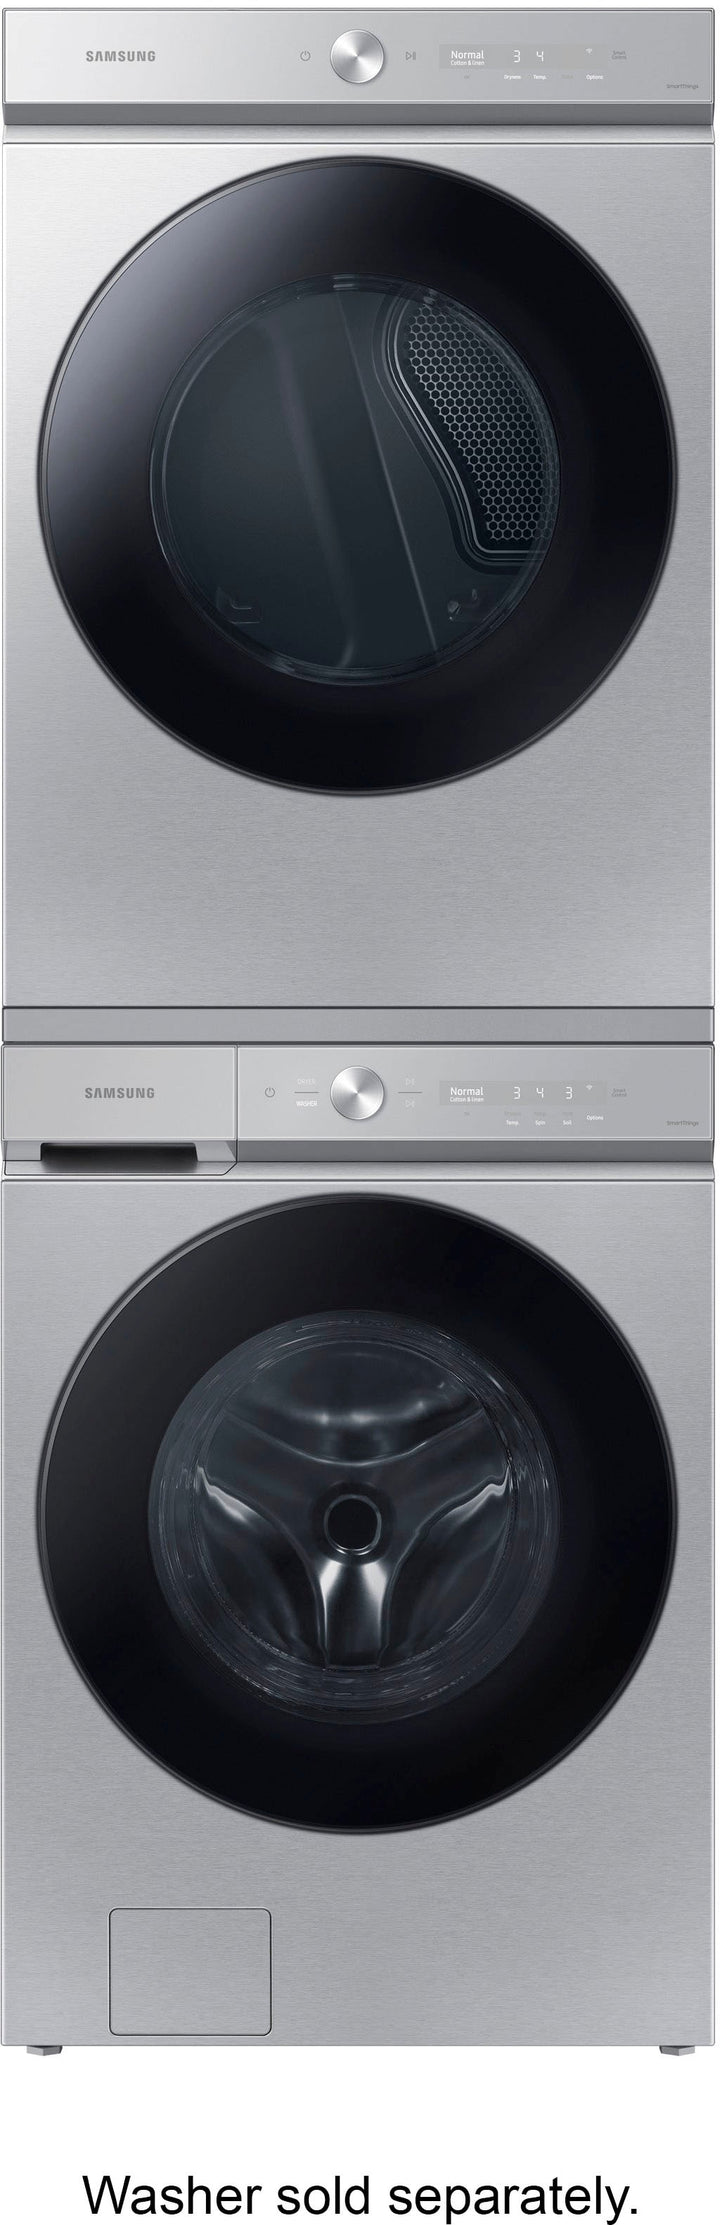 Samsung - Bespoke 7.6 cu. ft. Ultra Capacity Electric Dryer with Super Speed Dry and AI Smart Dial - Silver steel_11